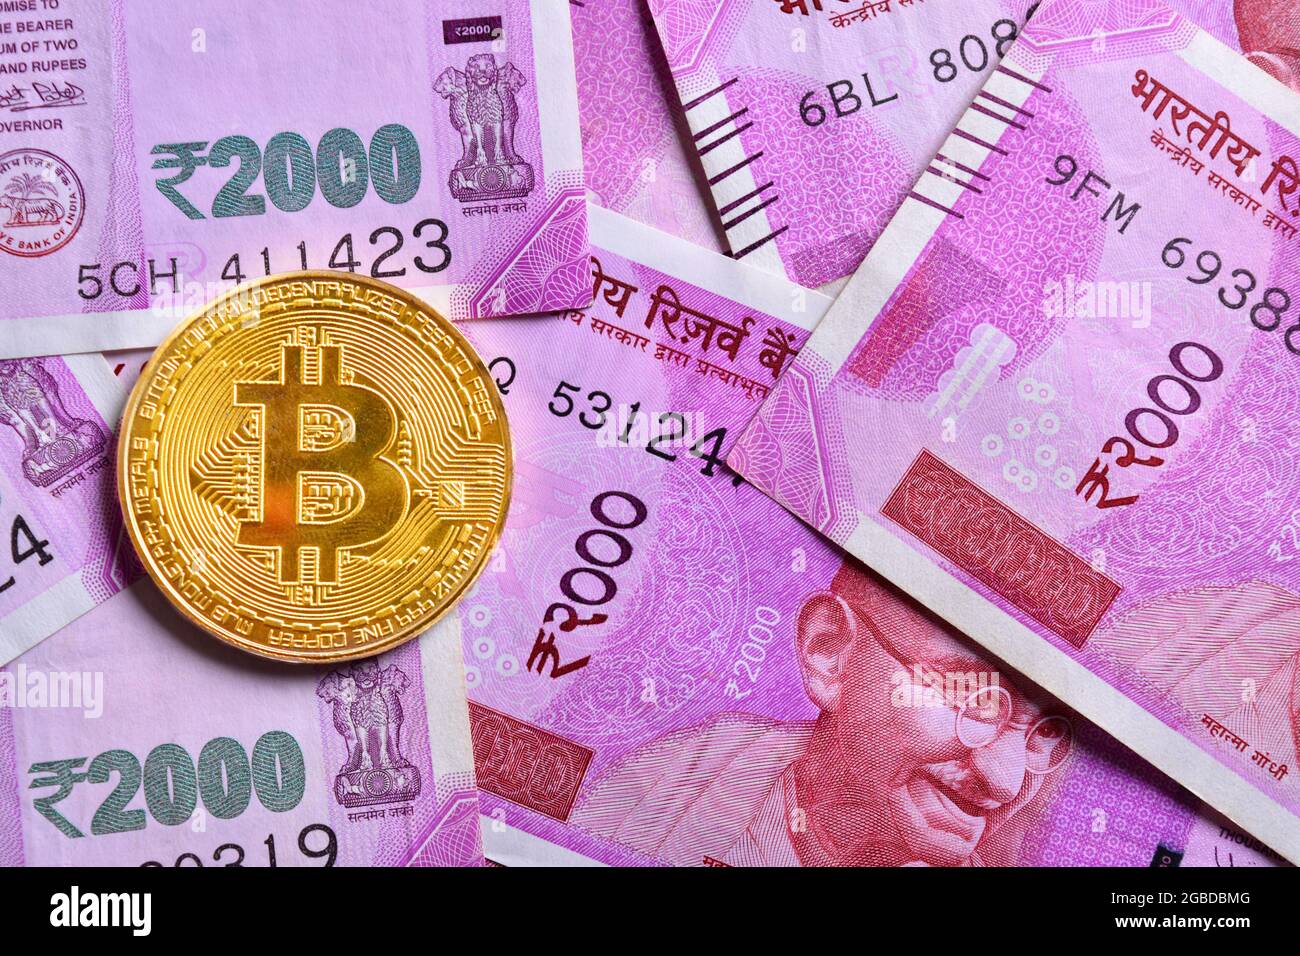 Top view Of Bitcoin With 2000 Rupees Indian Currency Stock Photo